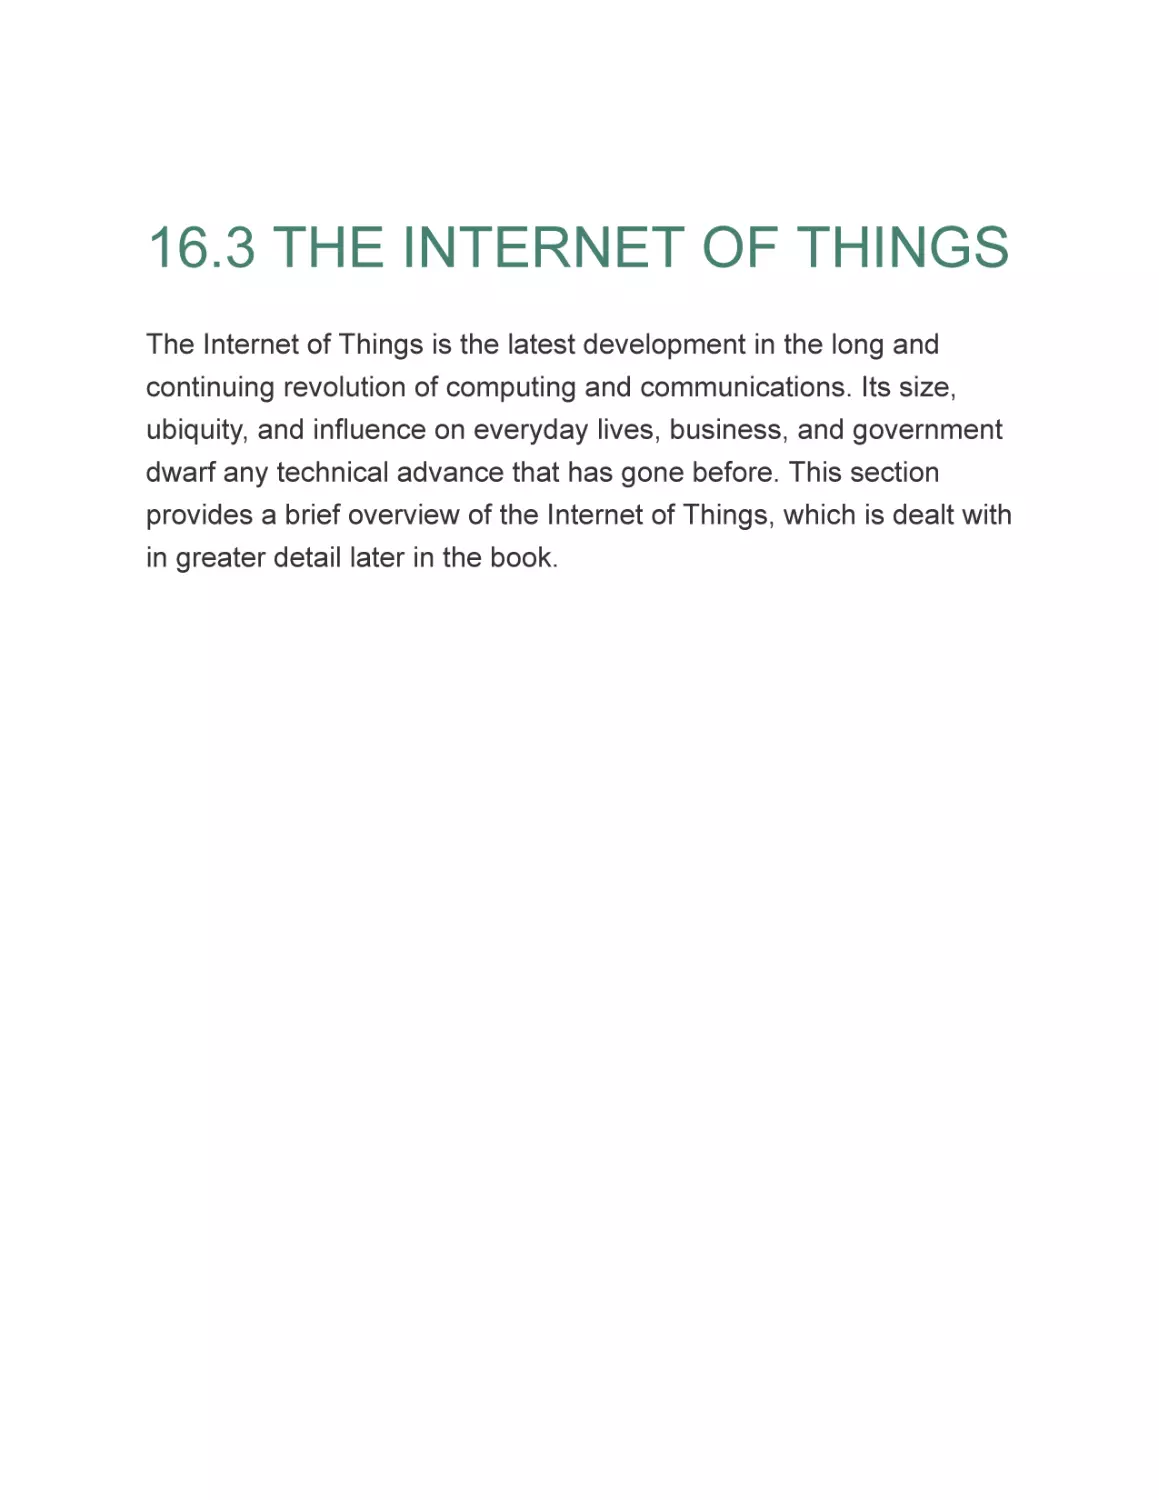 16.3 THE INTERNET OF THINGS